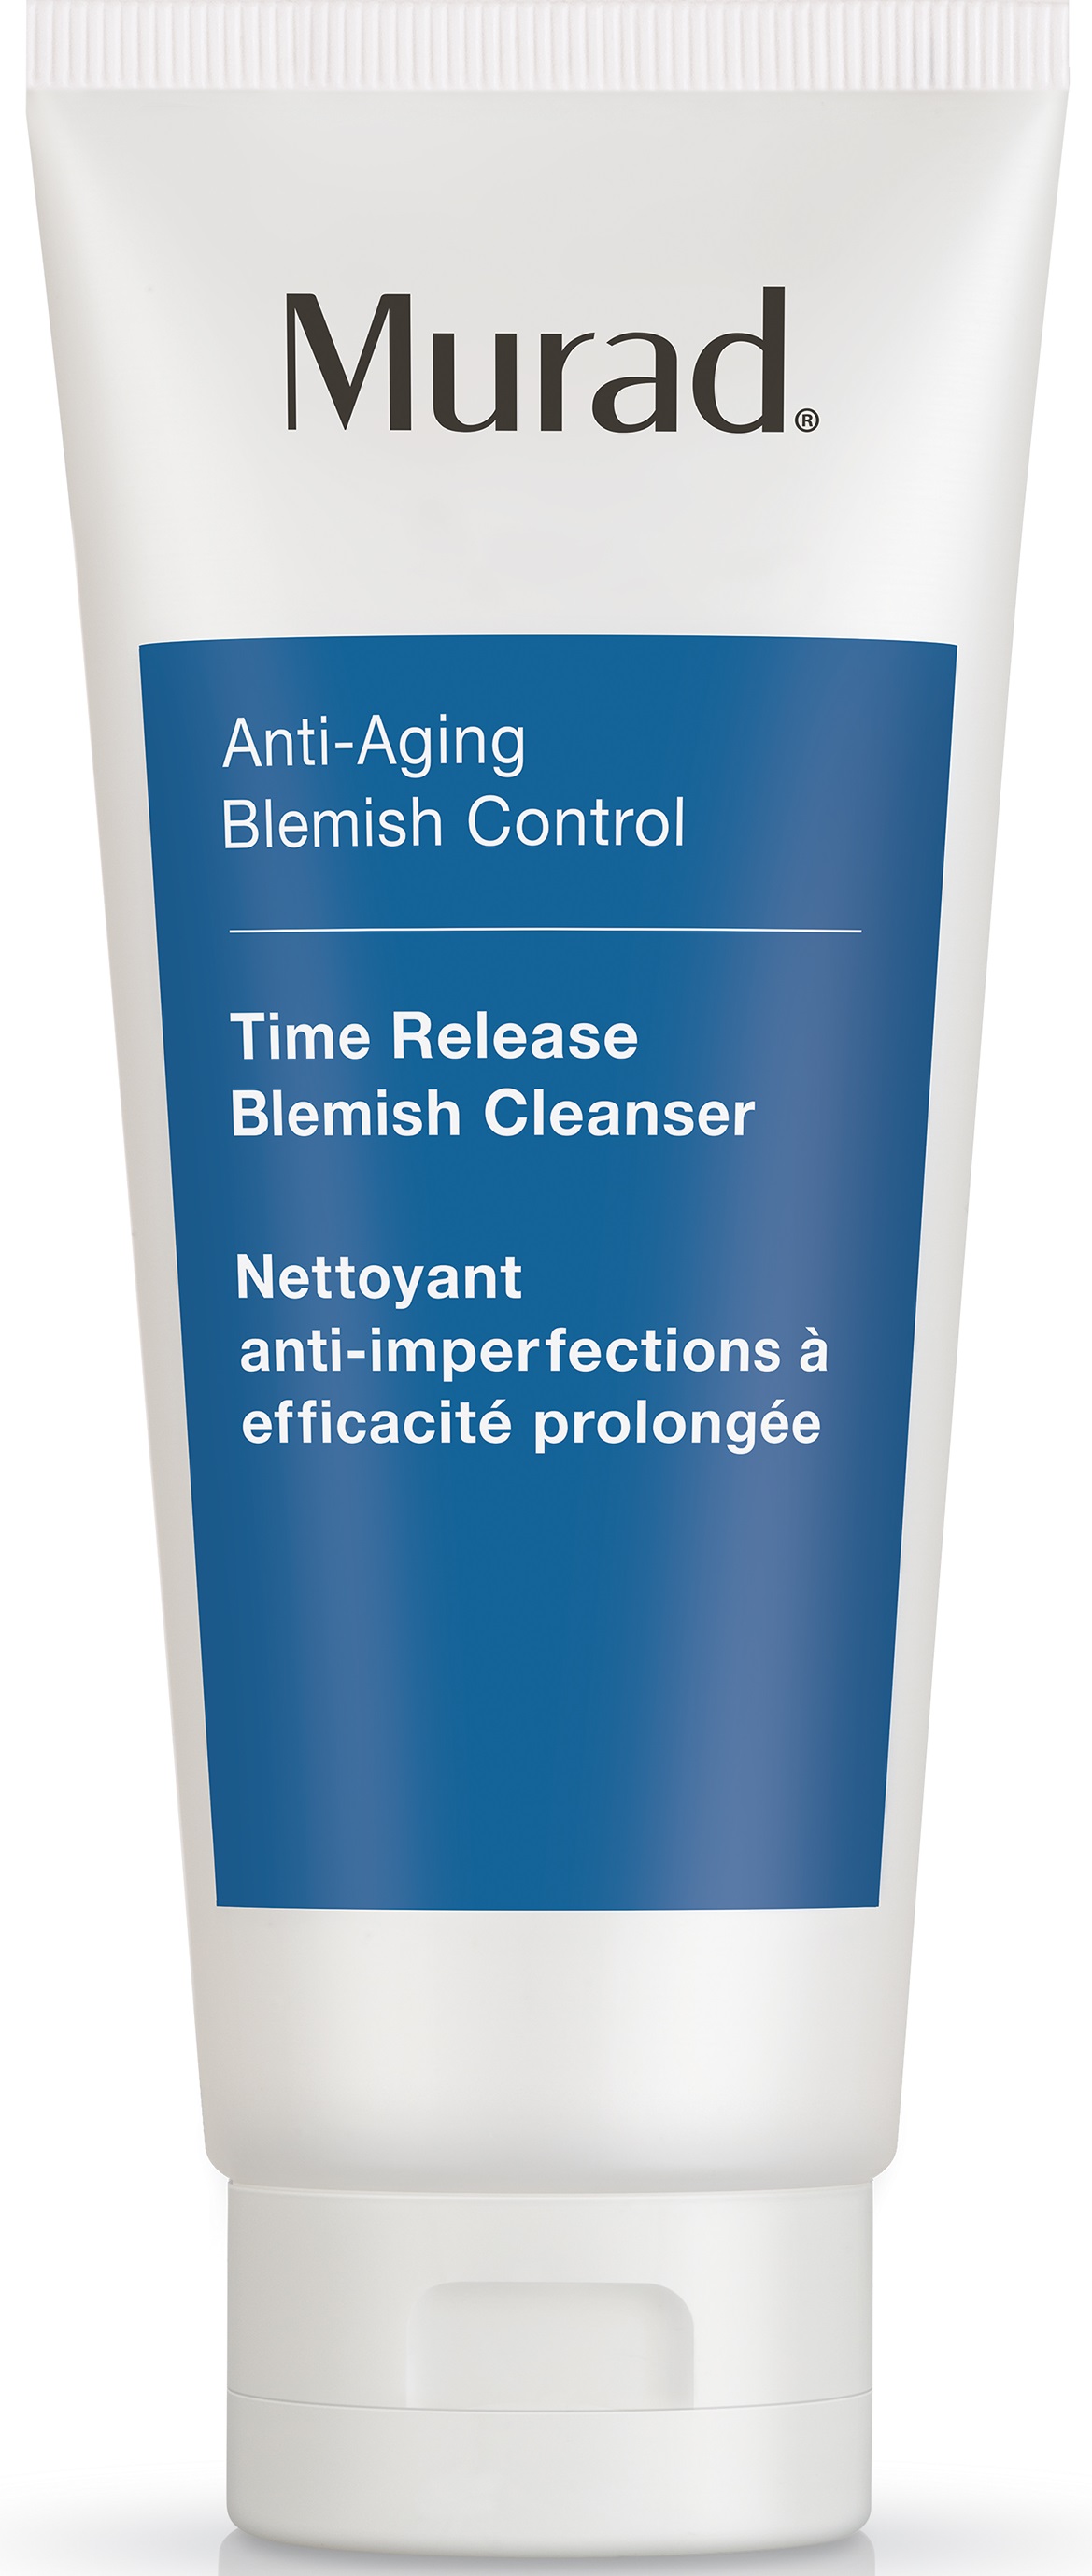 Murad Anti-Aging Blemish Control Time Release Blemish Cleanser